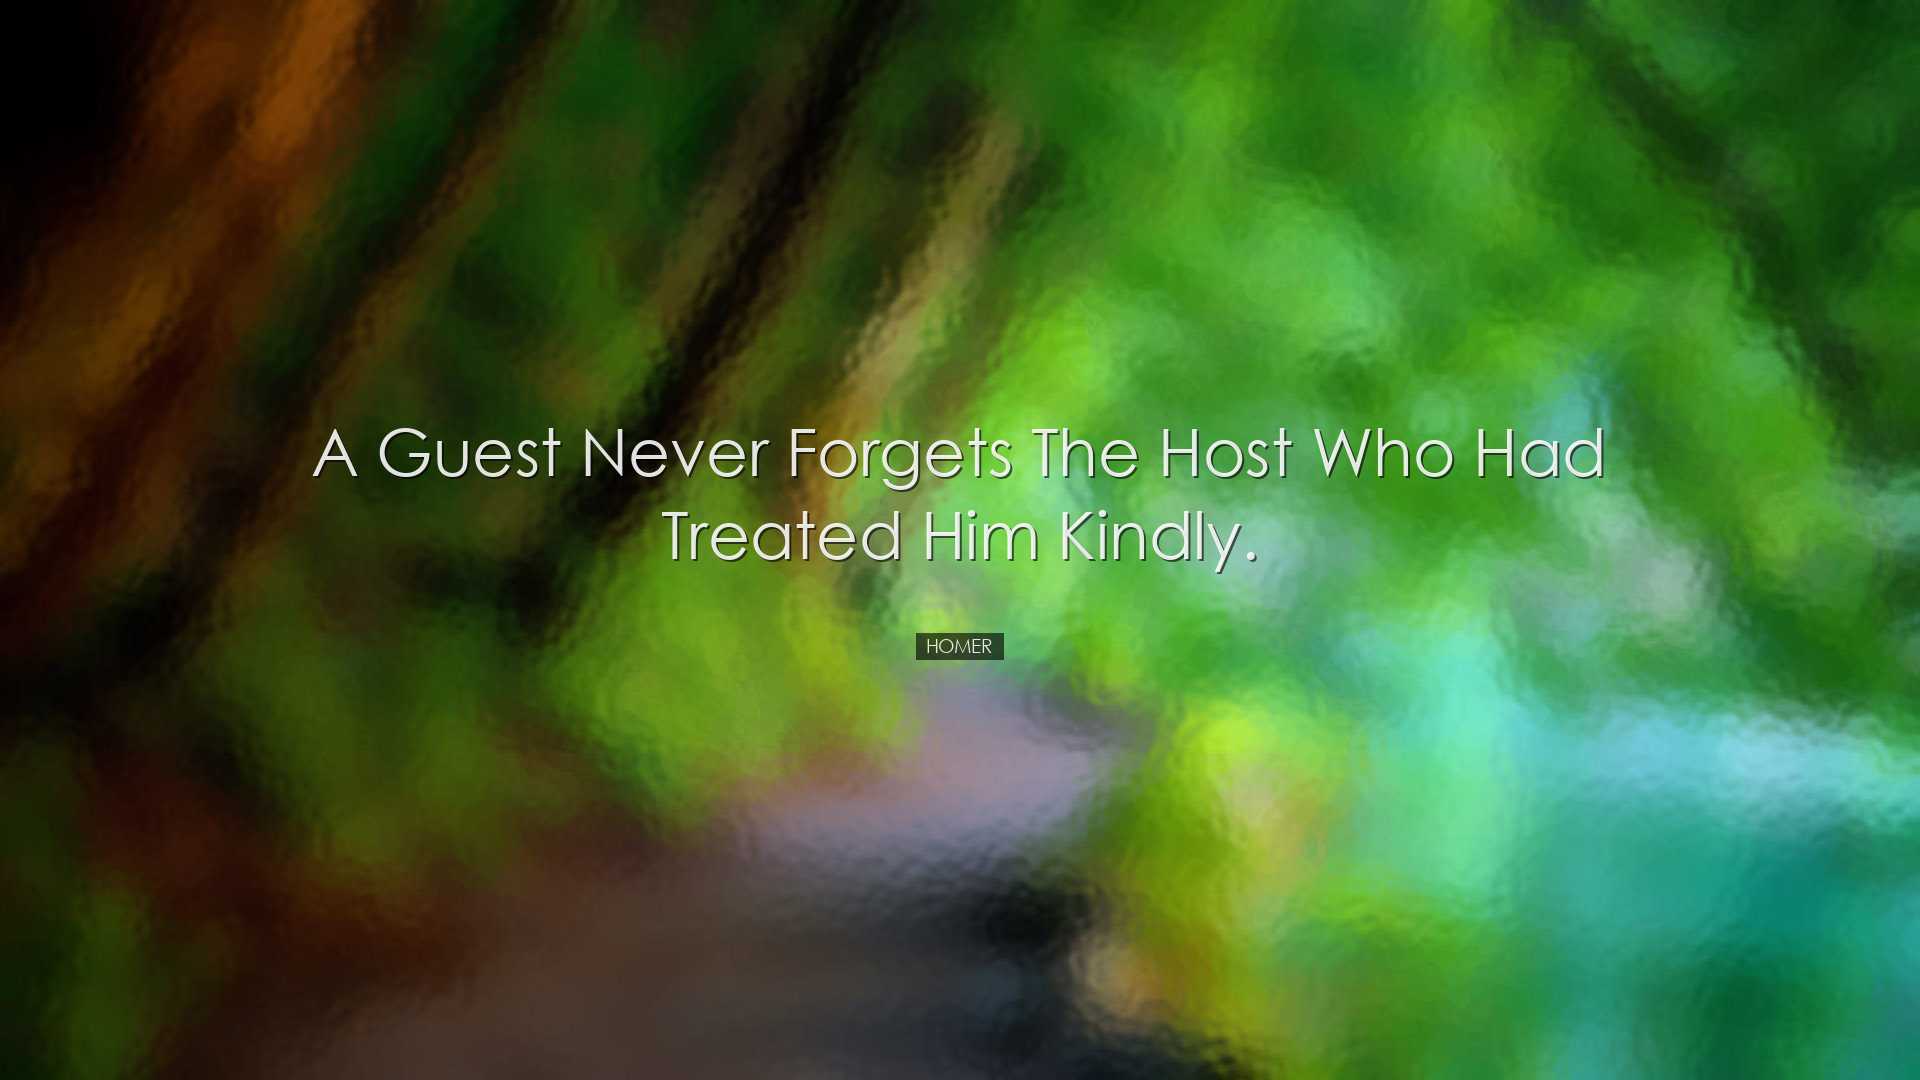 A guest never forgets the host who had treated him kindly. - Homer